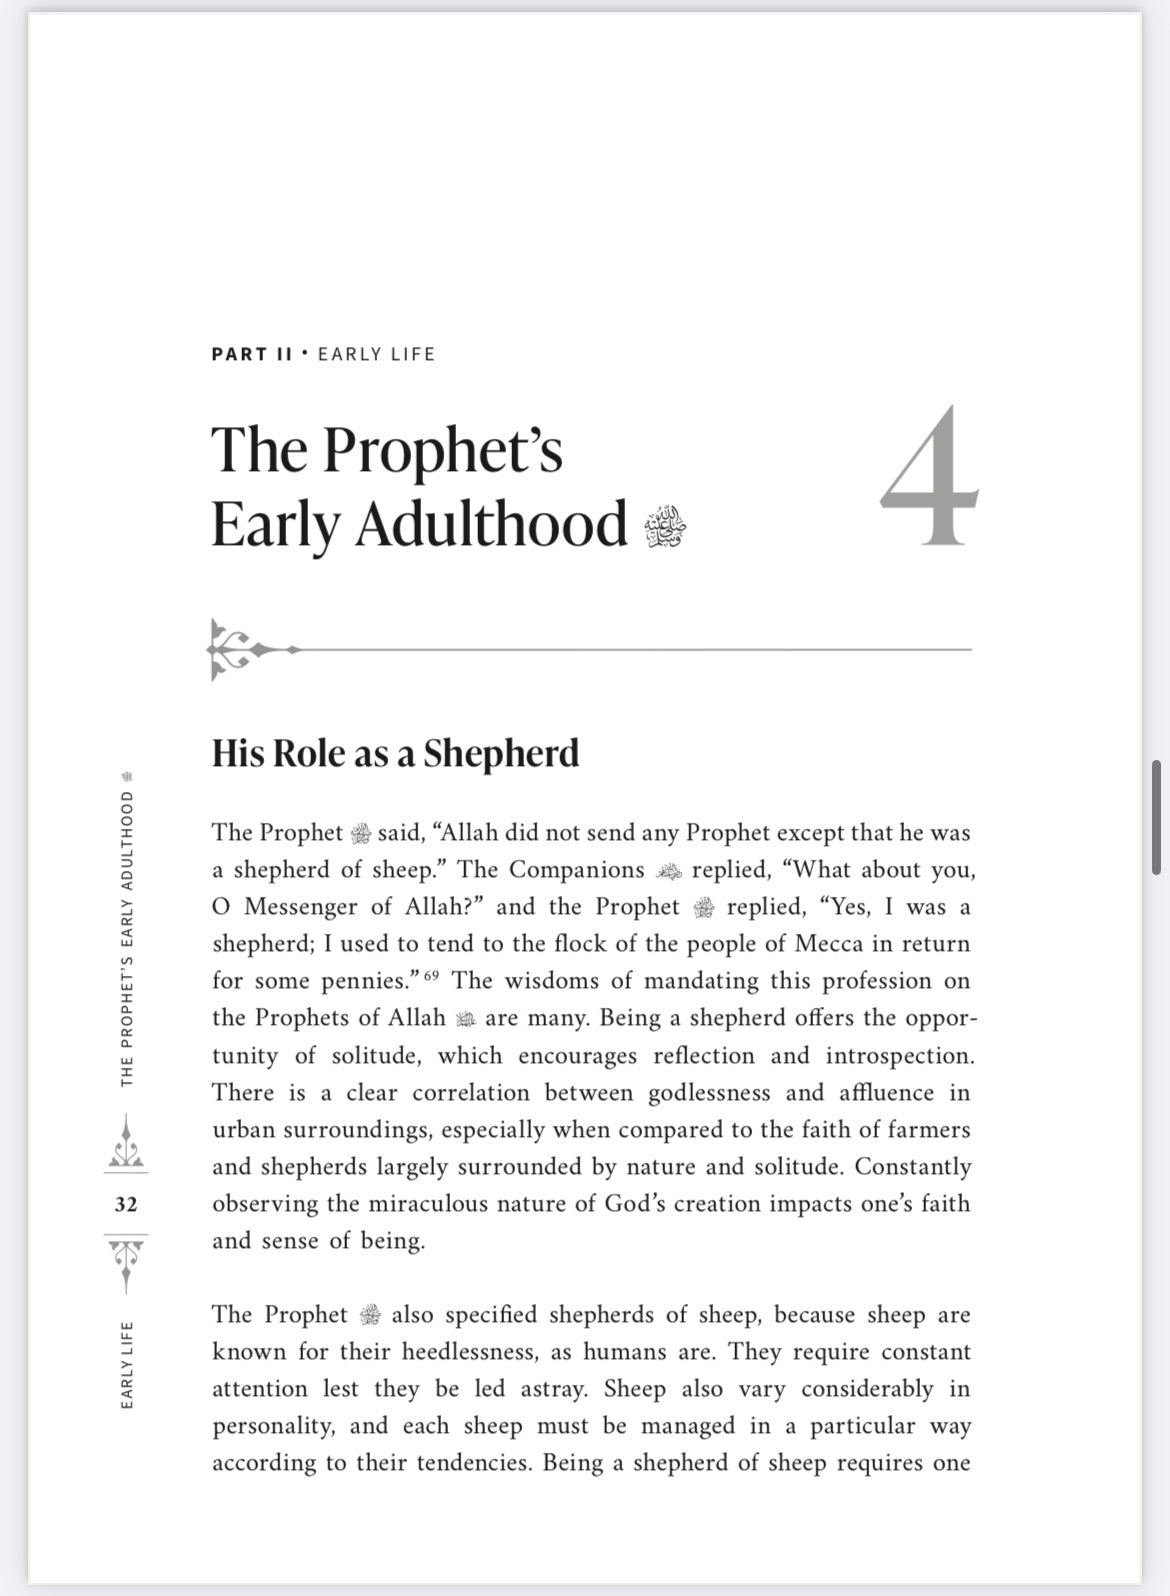 THE SIRAH OF THE PROPHET A CONTEMPORARY AND ORIGINAL ANALYSIS By (author) Yasir Qadhi